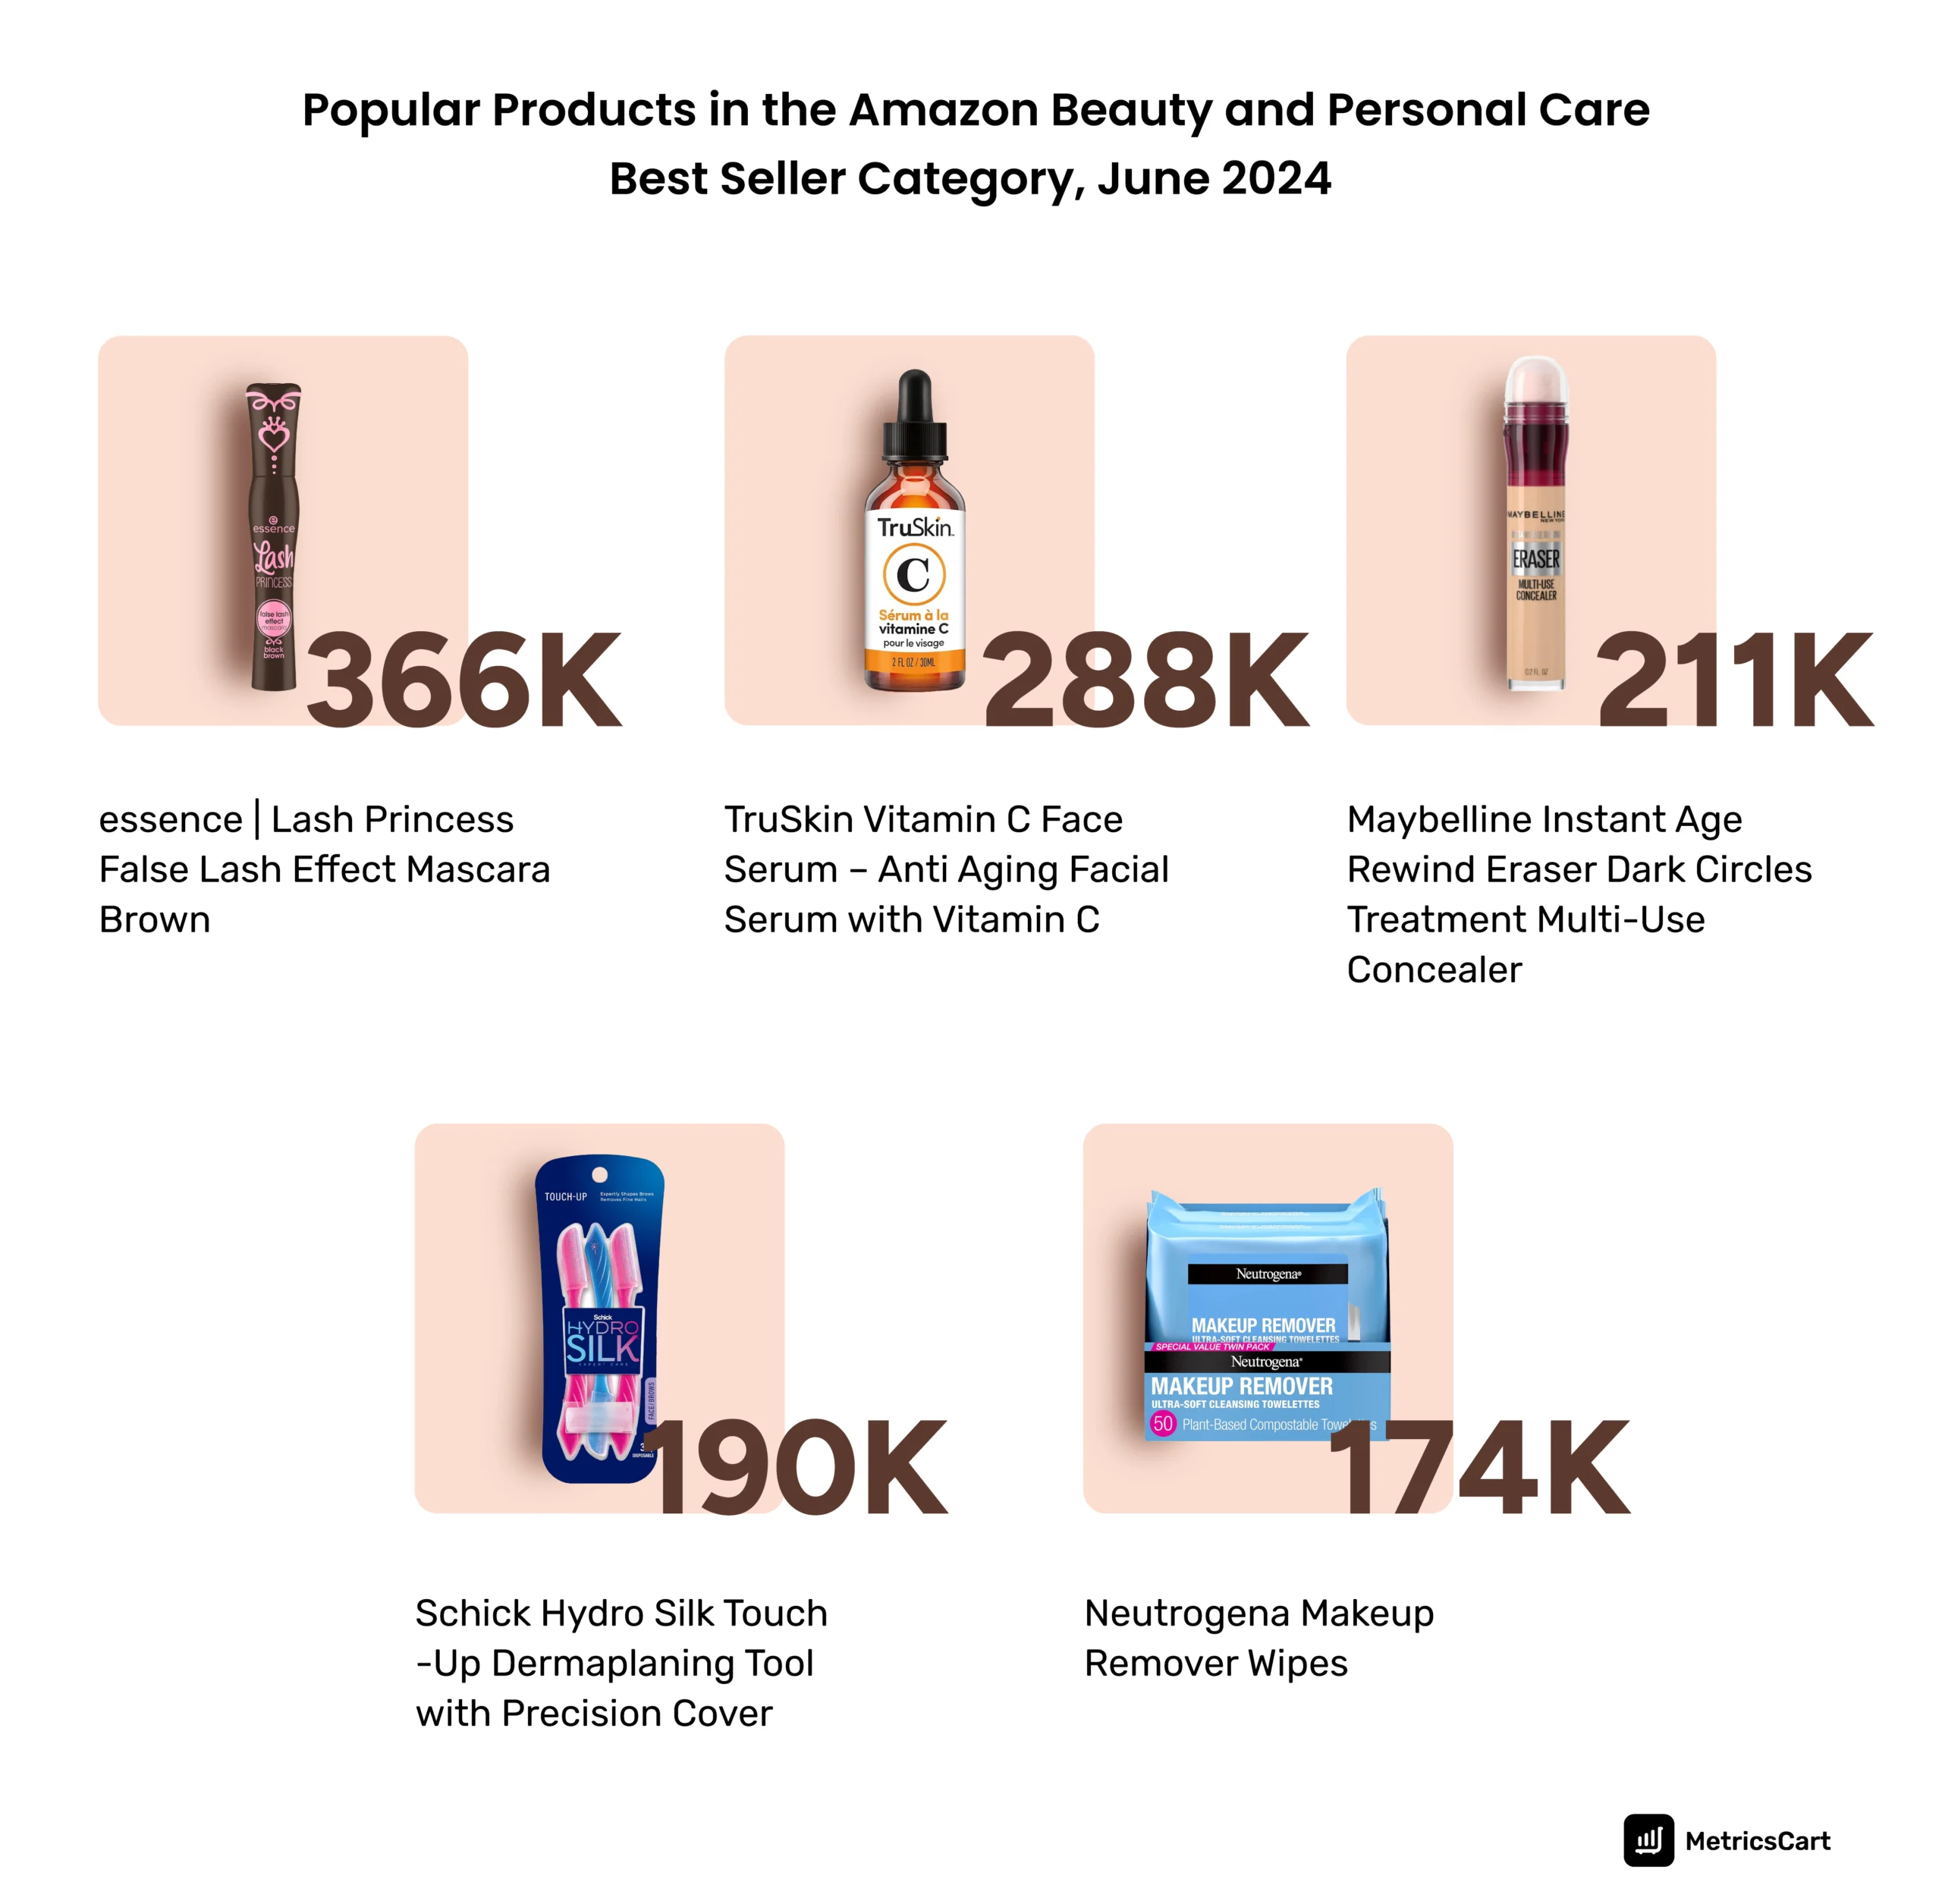 the top reviewed brands in the Amazon beauty and personal care Category.